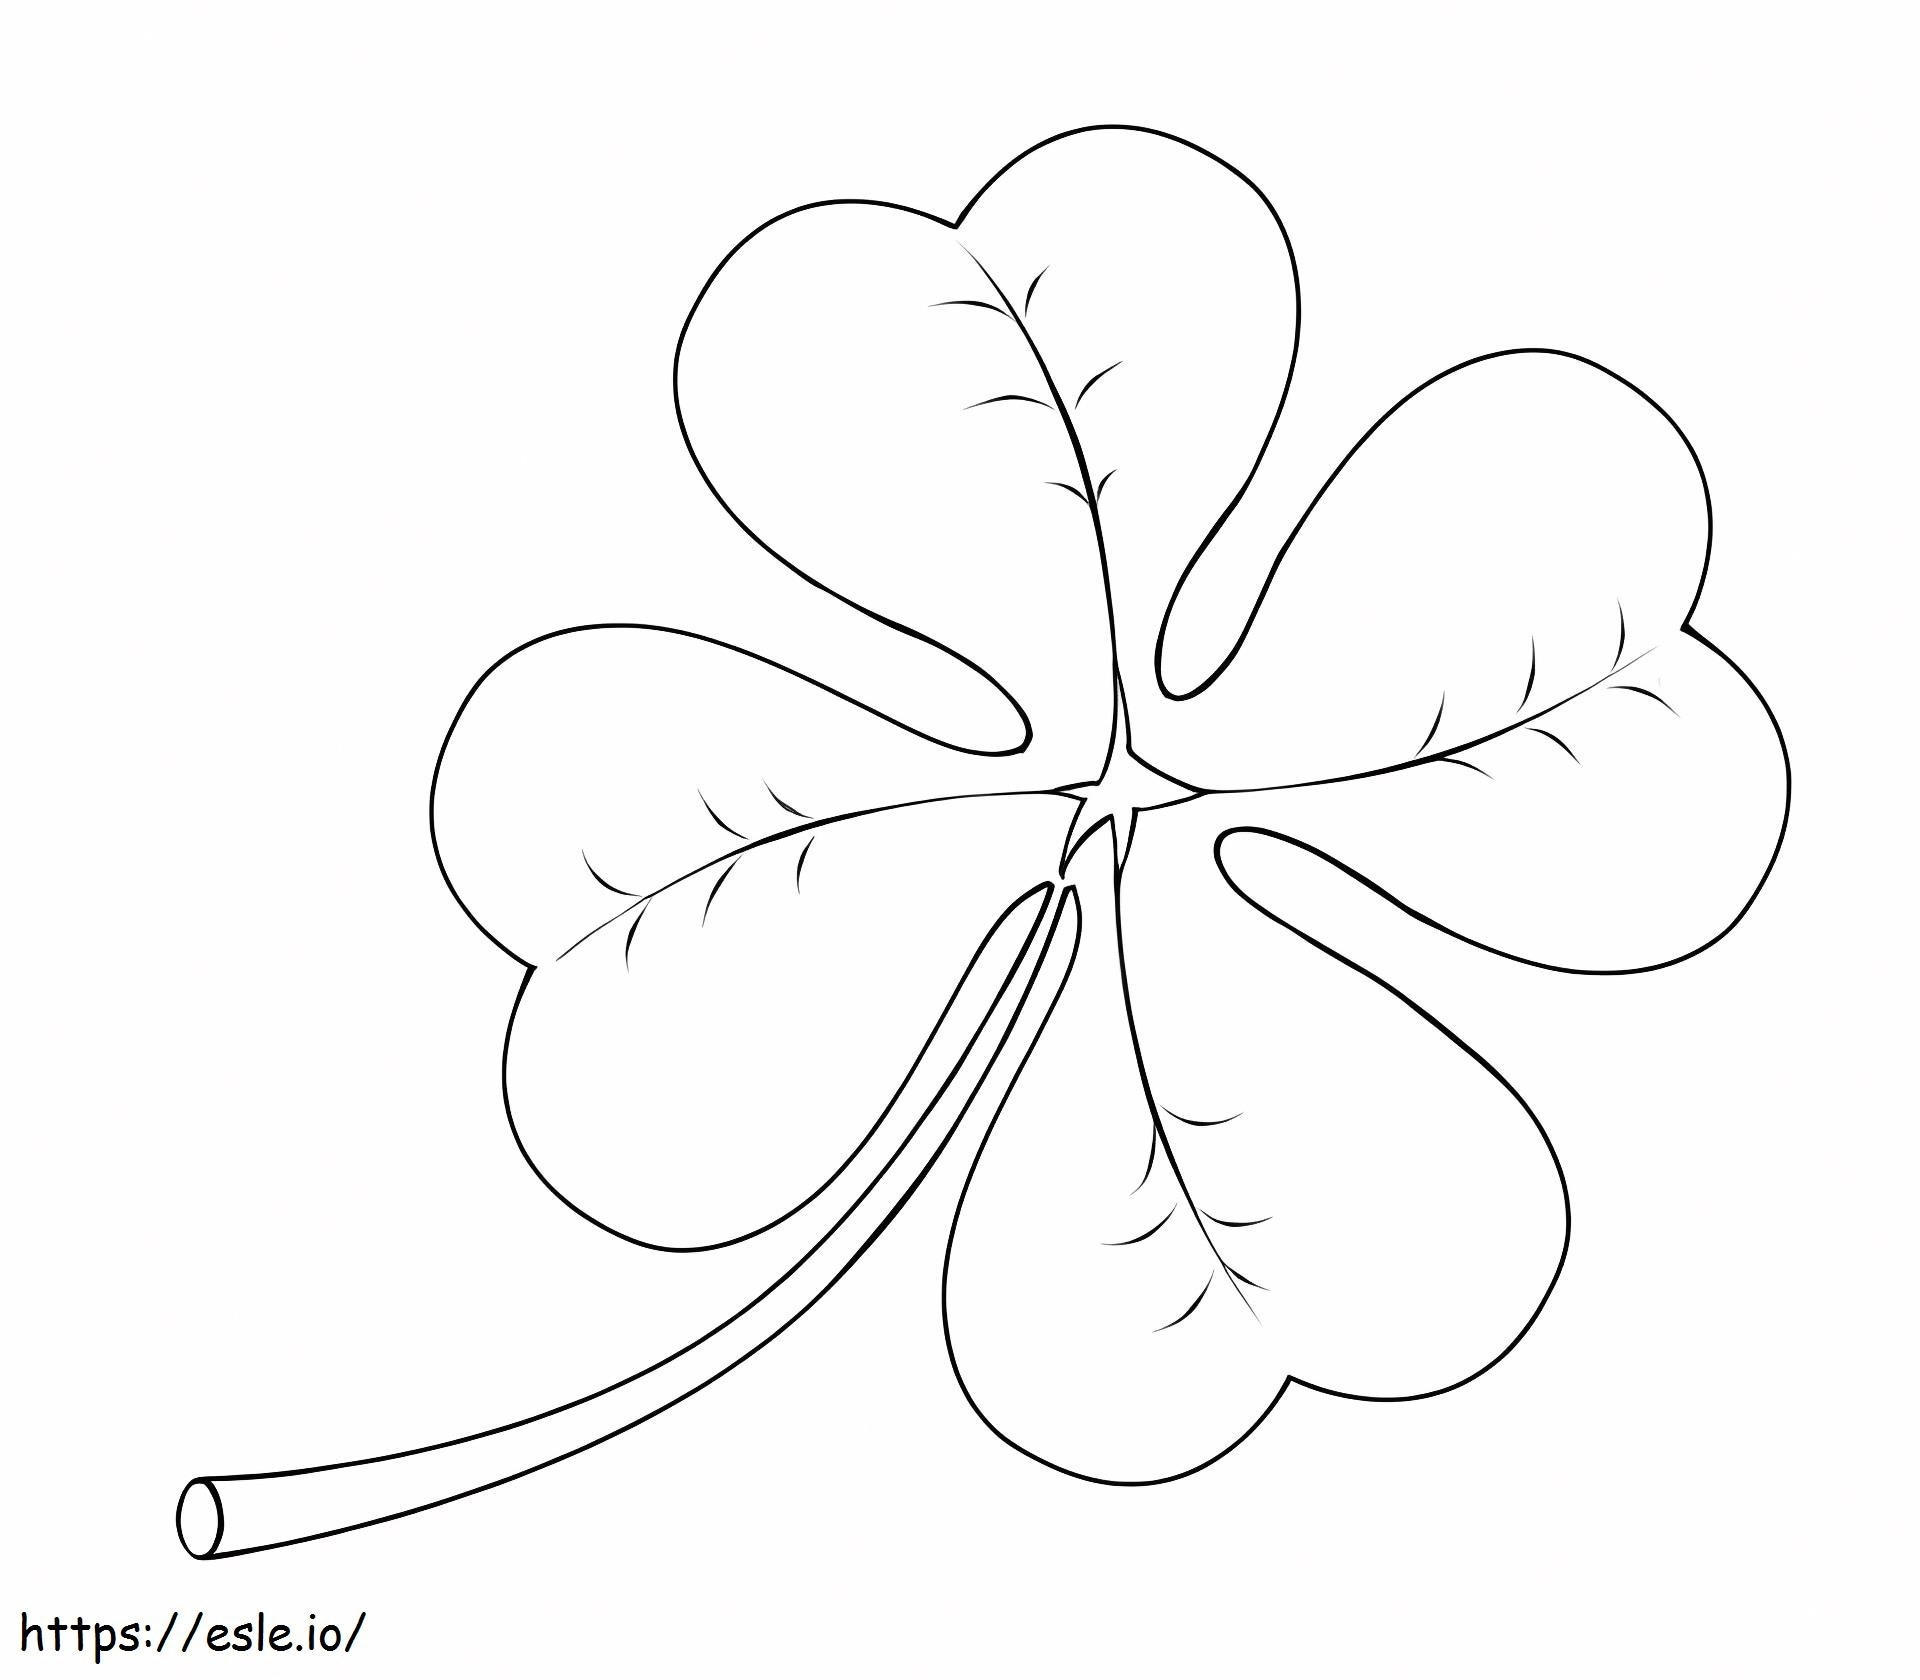 Four Leaf Clover coloring page